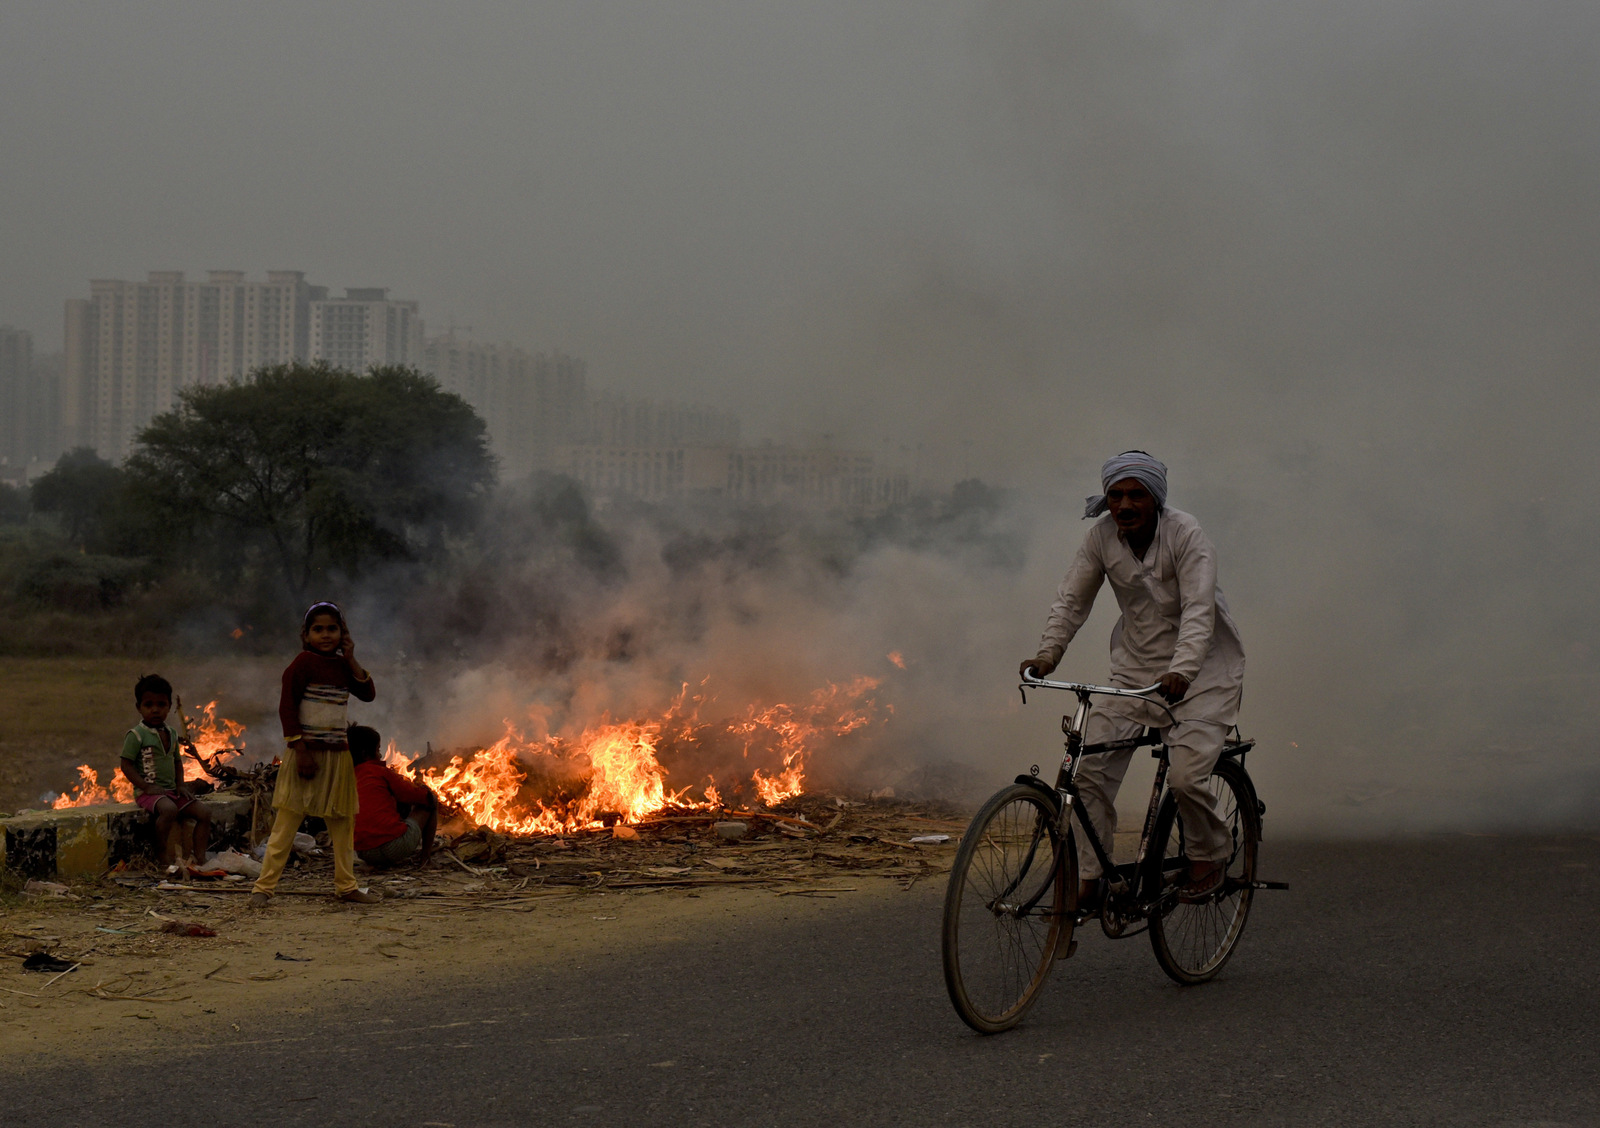 Smoke rises from garbage being burnt by a roadside on the outskirts of New Delhi, India,, Nov.16, 2017. As winter approaches, a thick, soupy smog routinely envelops most parts of northern India, caused by dust, the burning of crops, emissions from factories and the burning of coal and piles of garbage as the poor try to keep warm. New Delhi is one of the world's most polluted cities. (AP/R S Iyer)